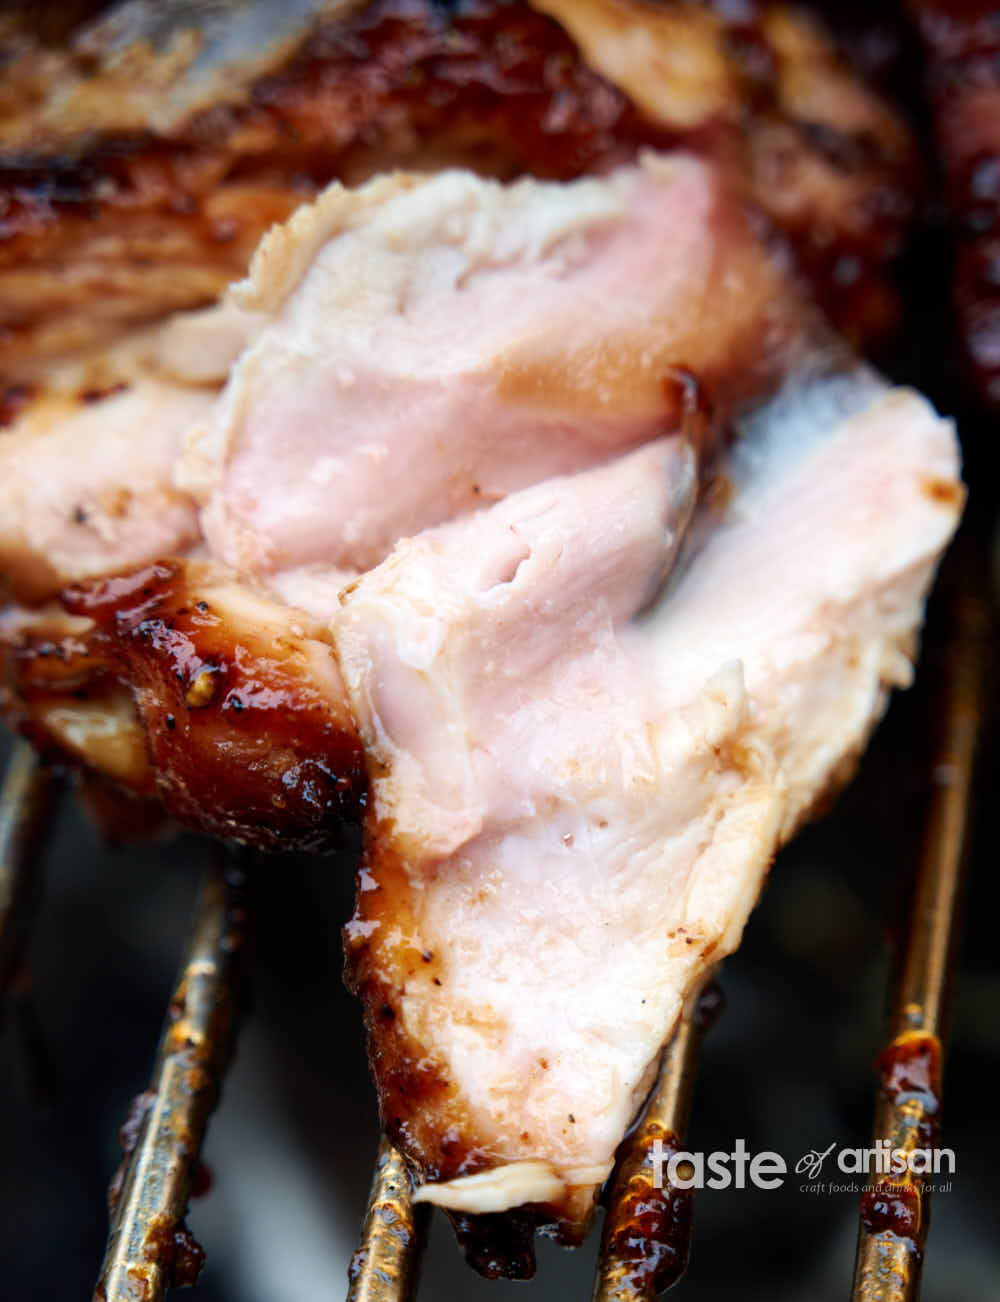 Juicy and moist smoked chicken thigh meat.